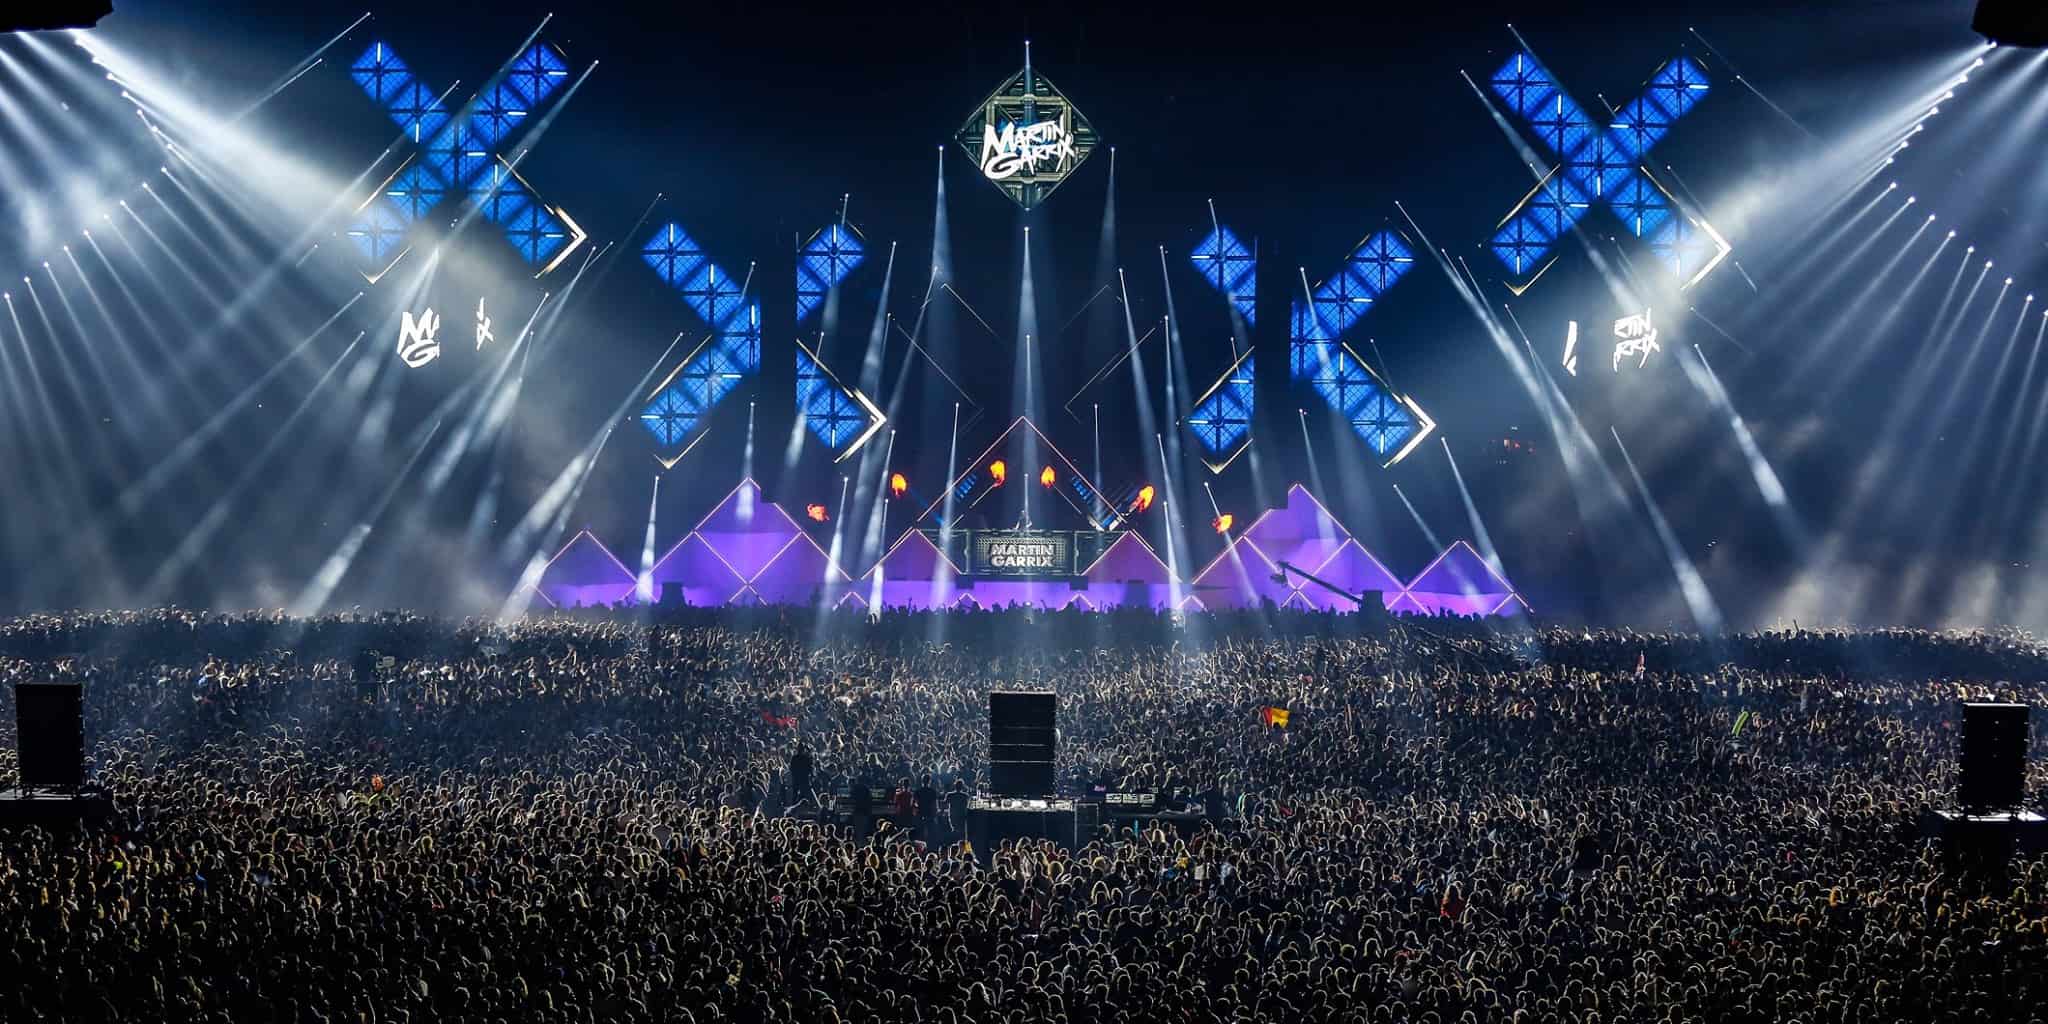 Top 100 DJs Awards 2021 show presented by AMF announced for ADE